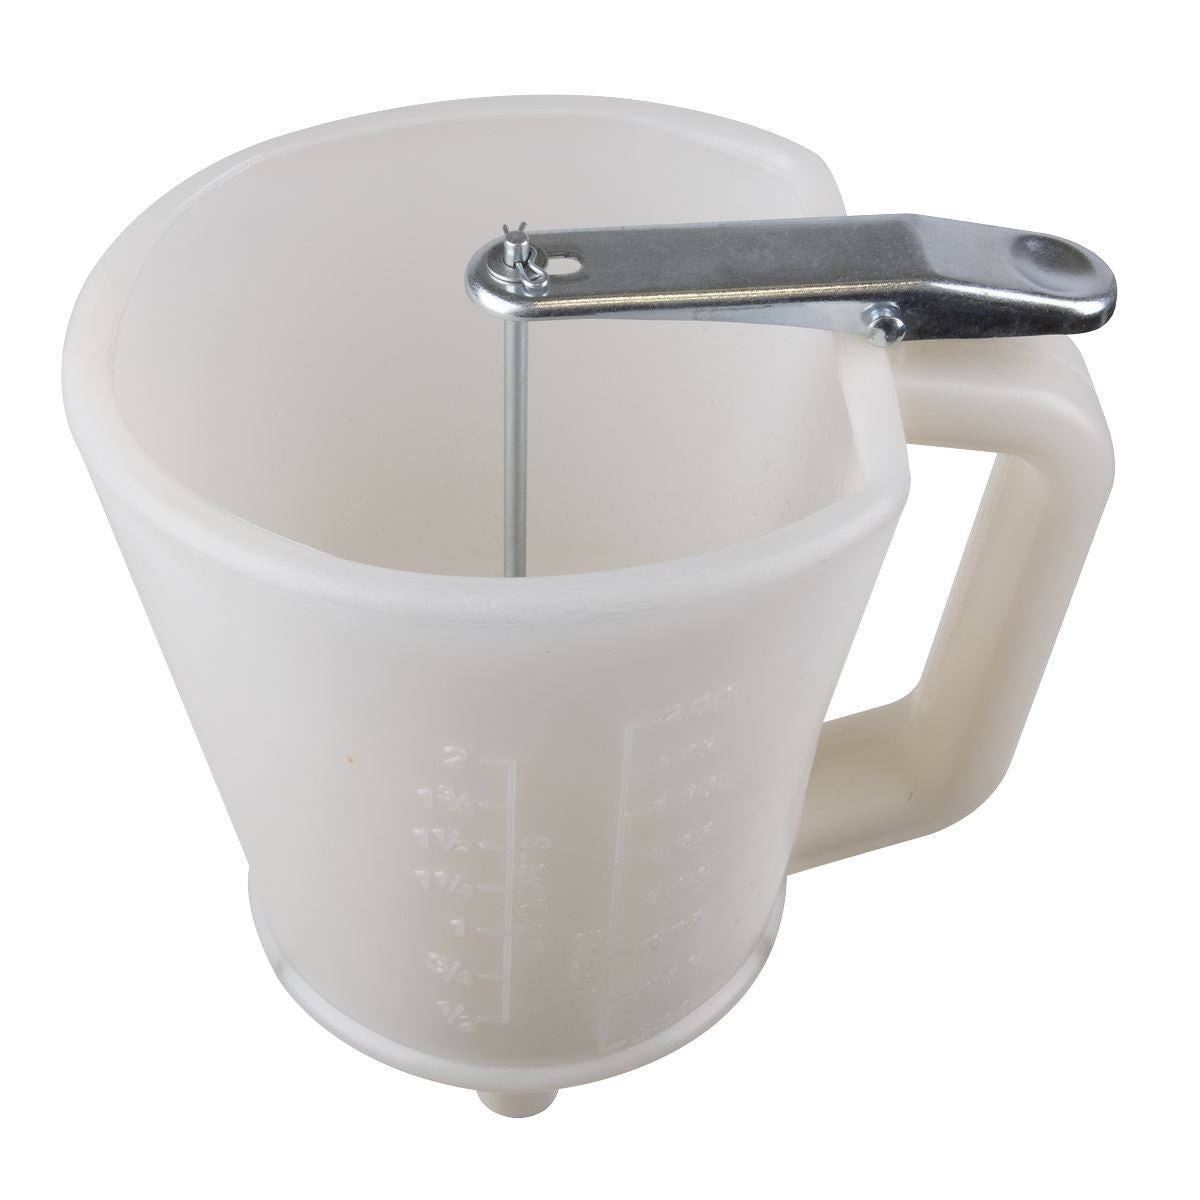 Sealey Measuring Funnel with Lid and Base 2L